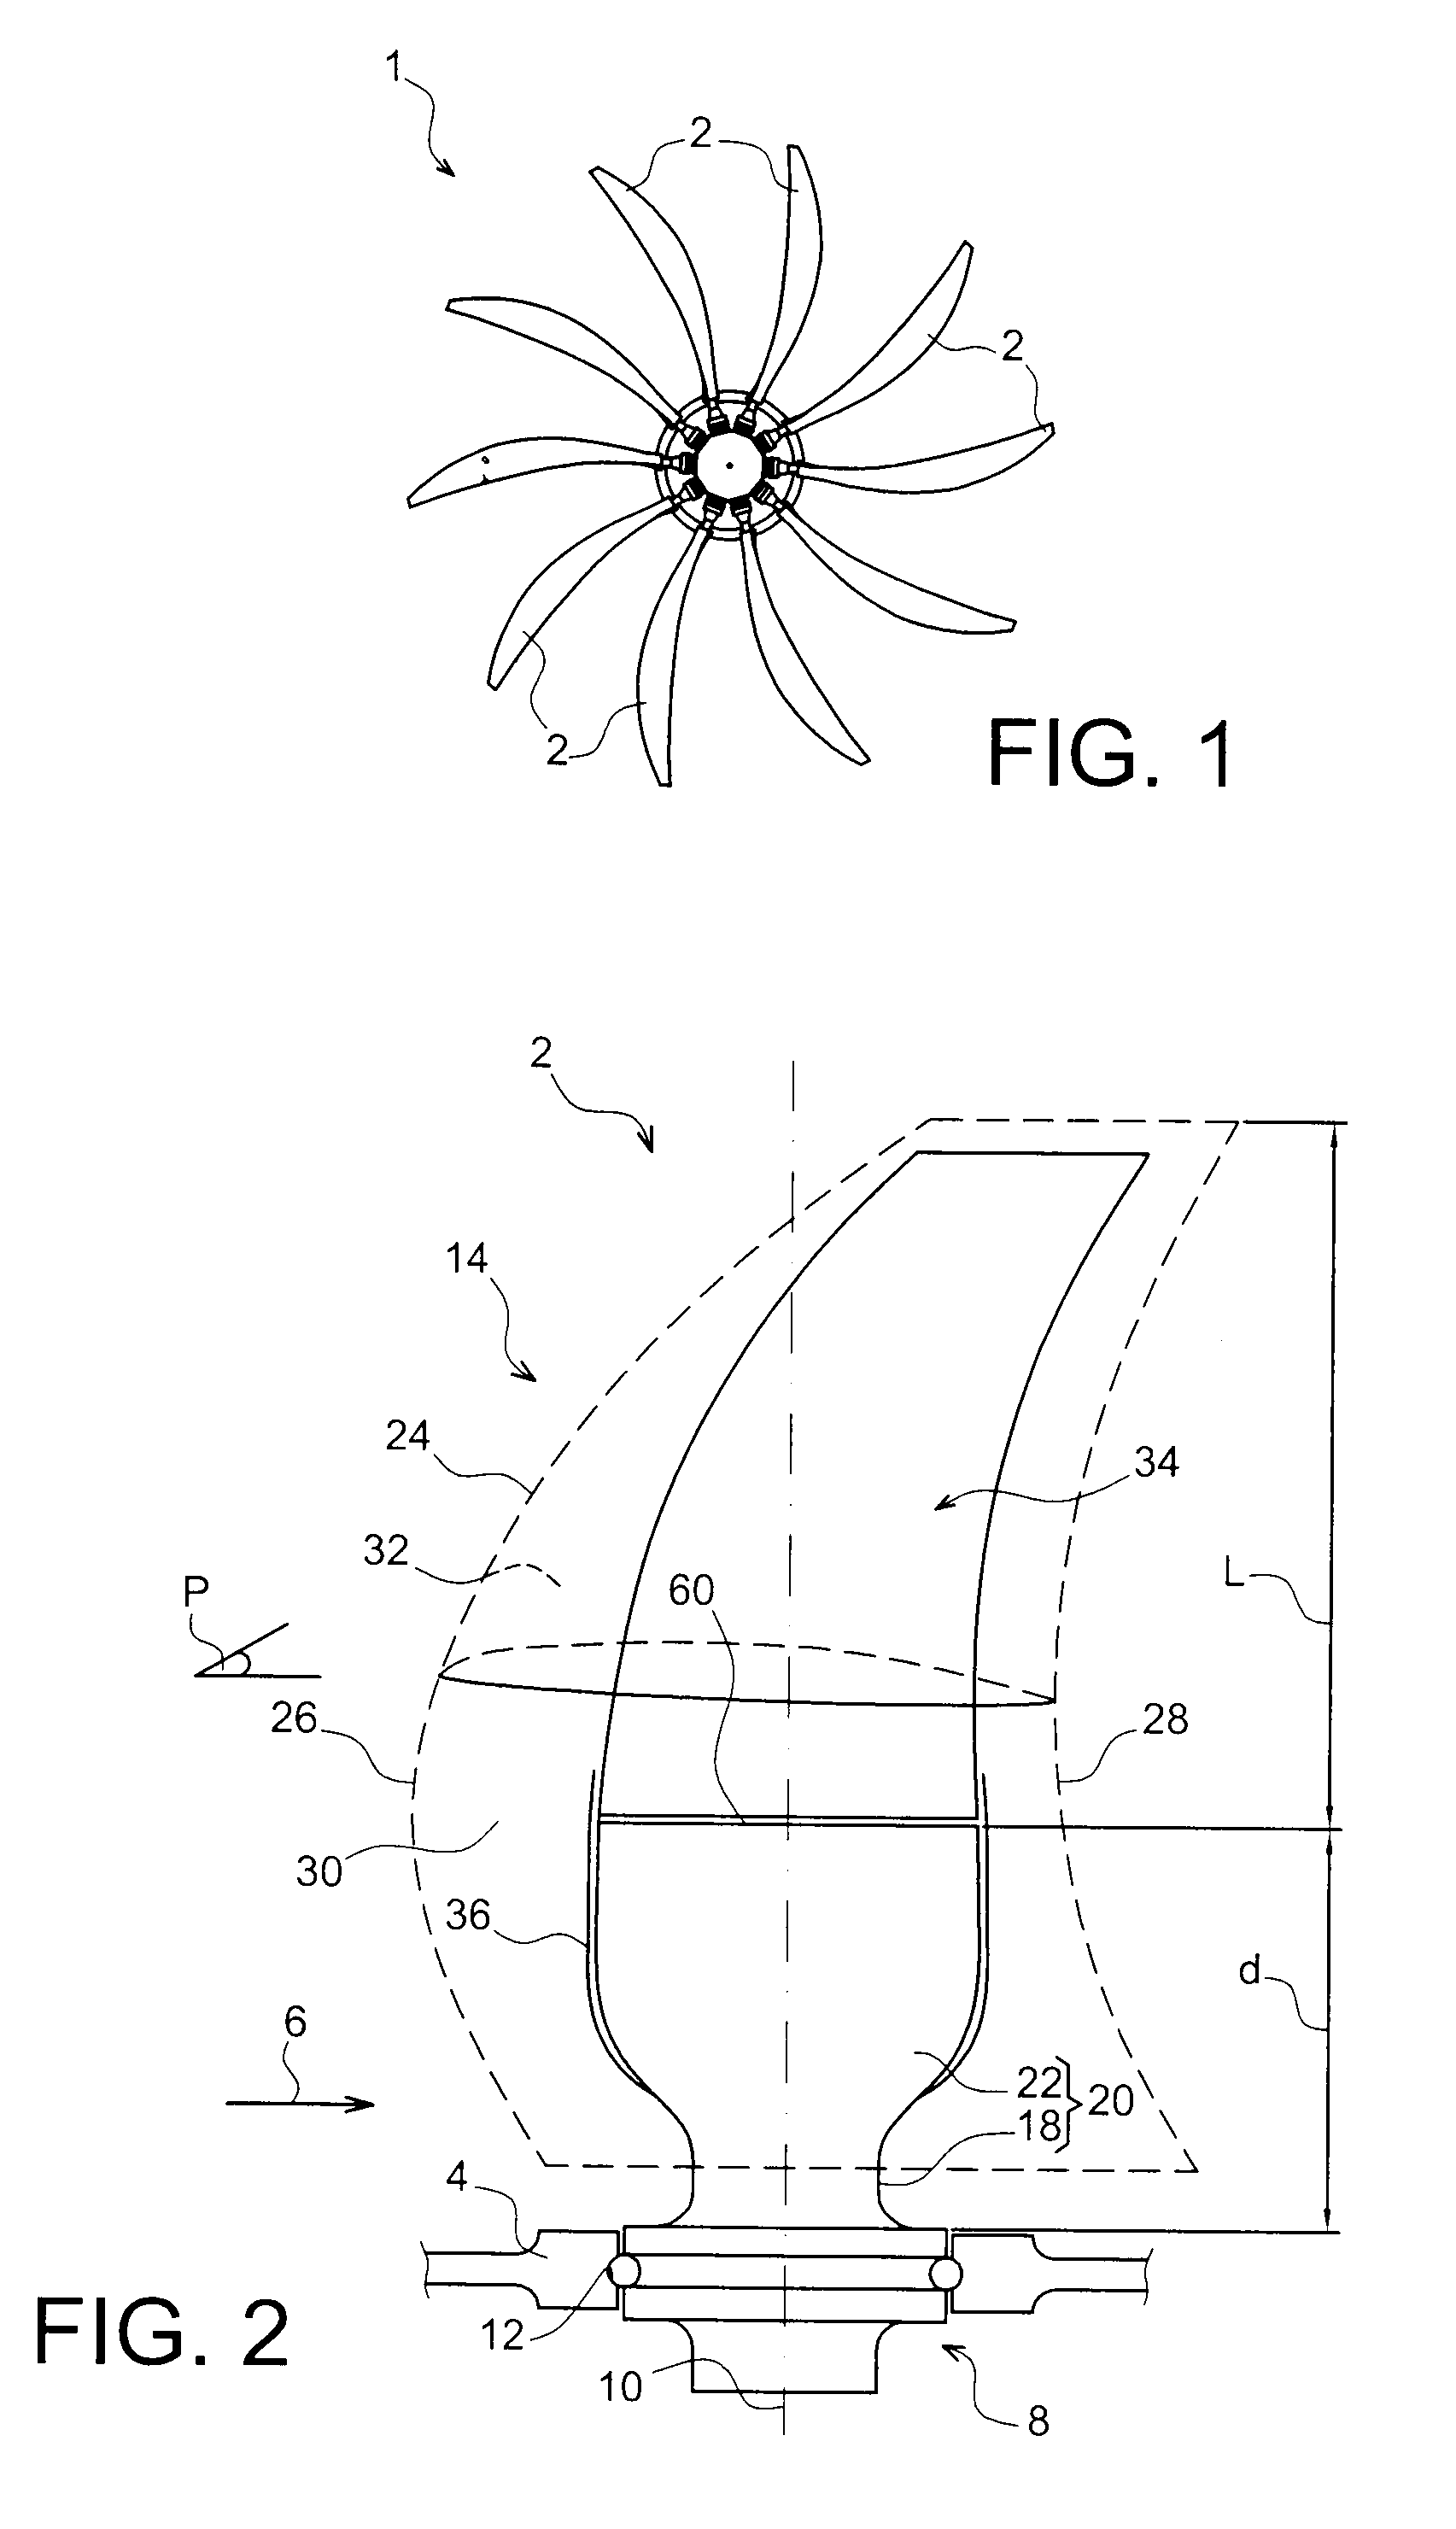 Blade for turbomachine receiving part, comprising an airfoil part including a mechanical fuse